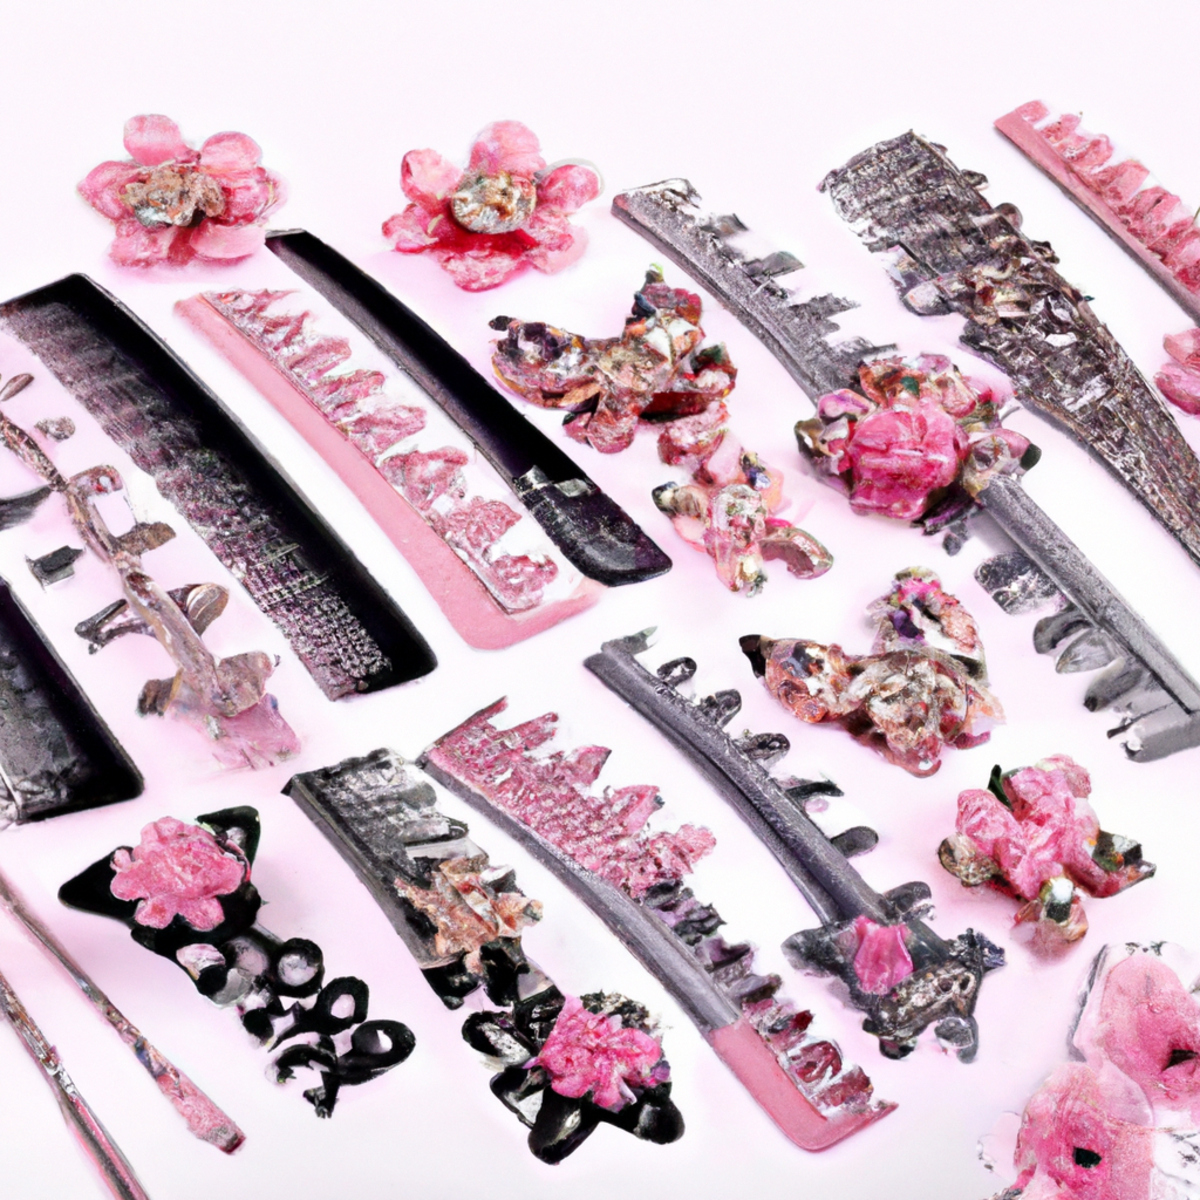 A stunning array of hair accessories on a white background, showcasing rhinestone hairpins, floral clips, a pearl and crystal hairband, and vibrant silk scrunchies.